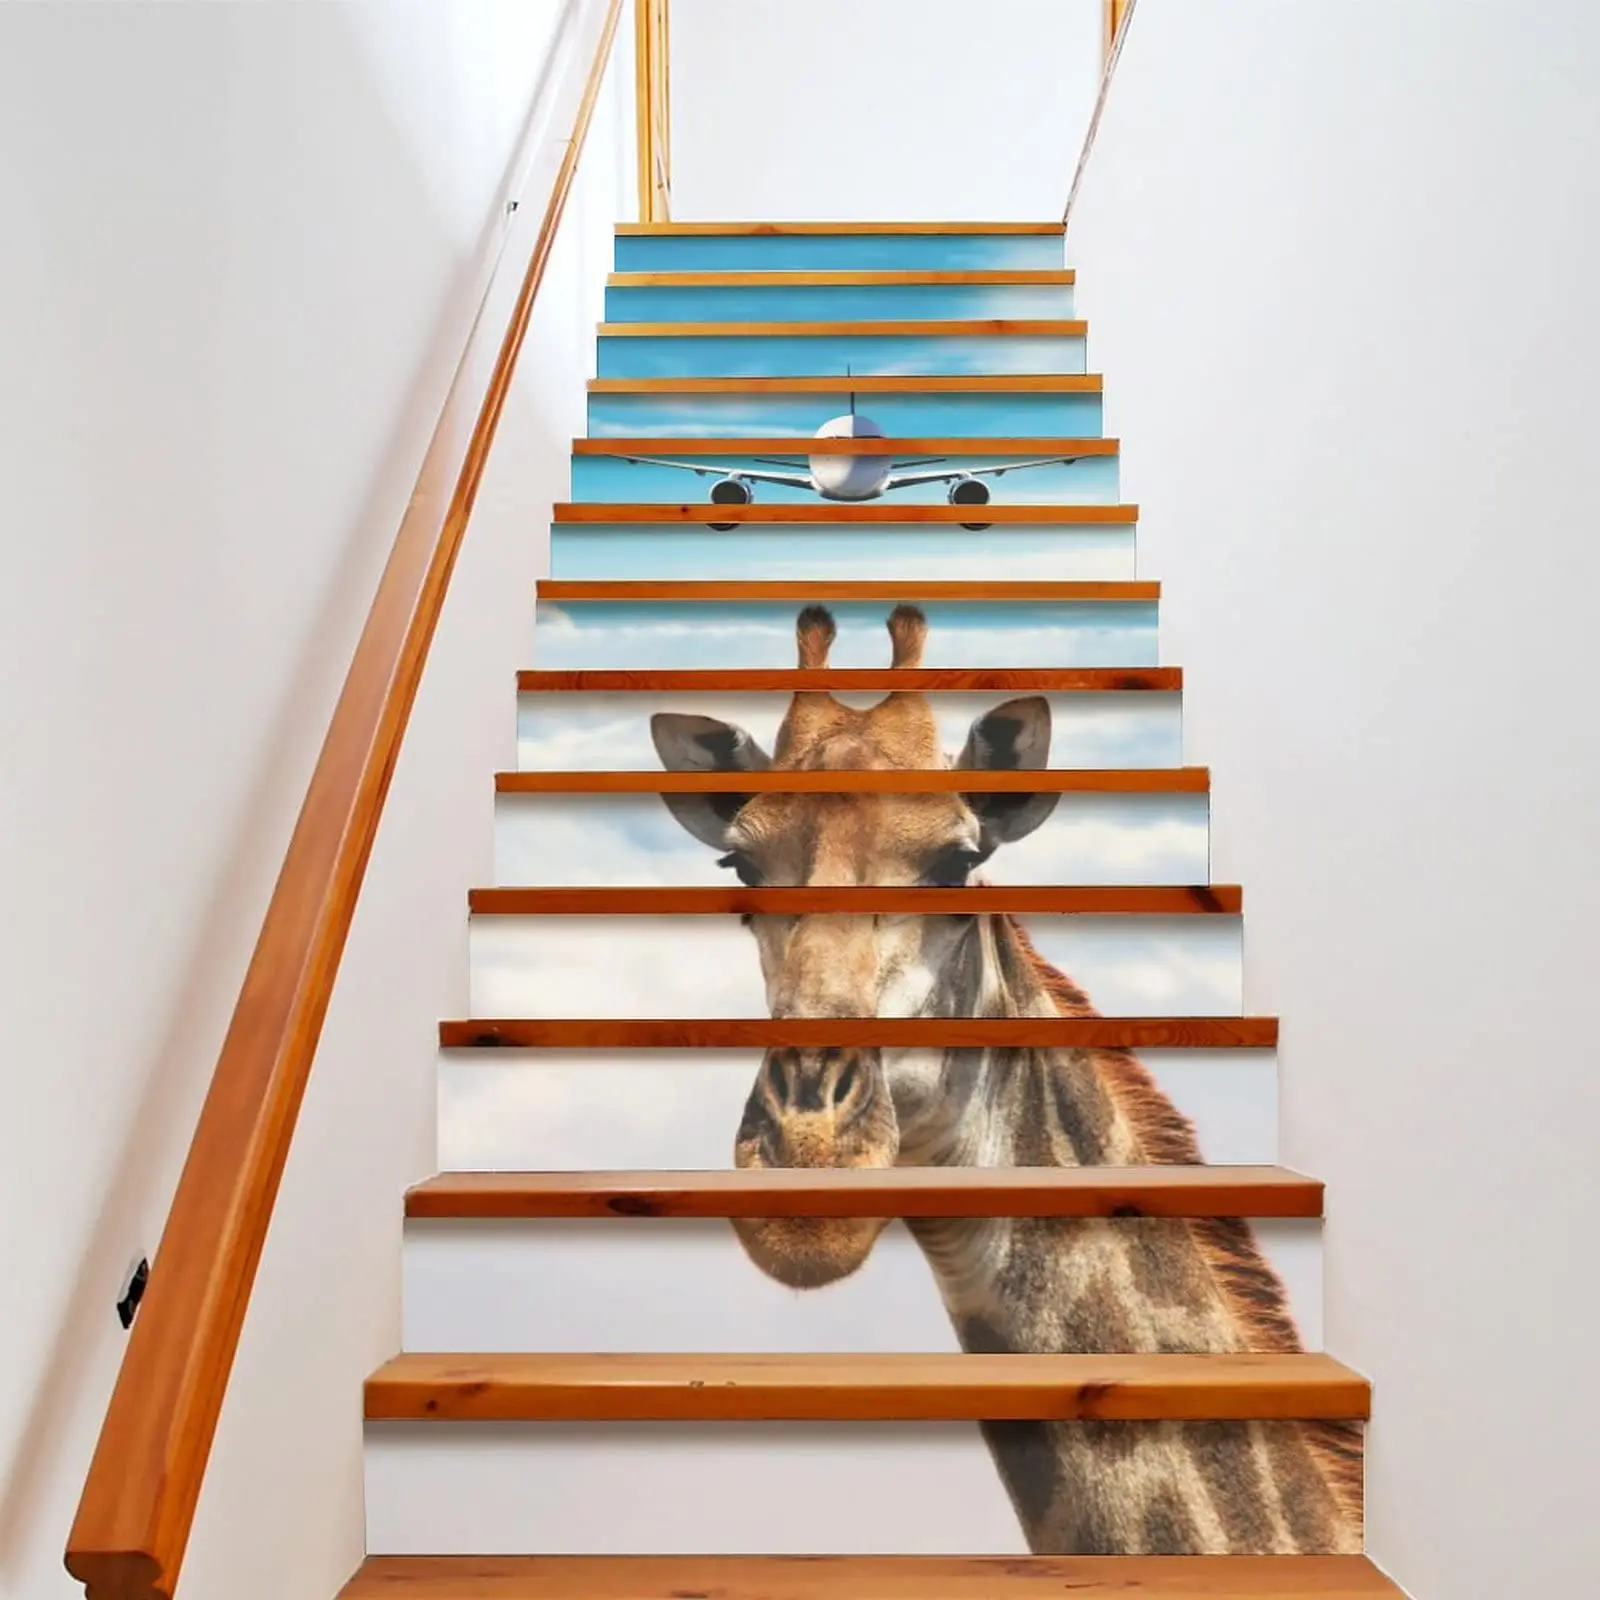 

Giraffe Stair Stickers Lovely Wild Animal Leaf Staircase Riser Decals Airplane Sky Stairway Murals Home Step Decor Self-Adhesive